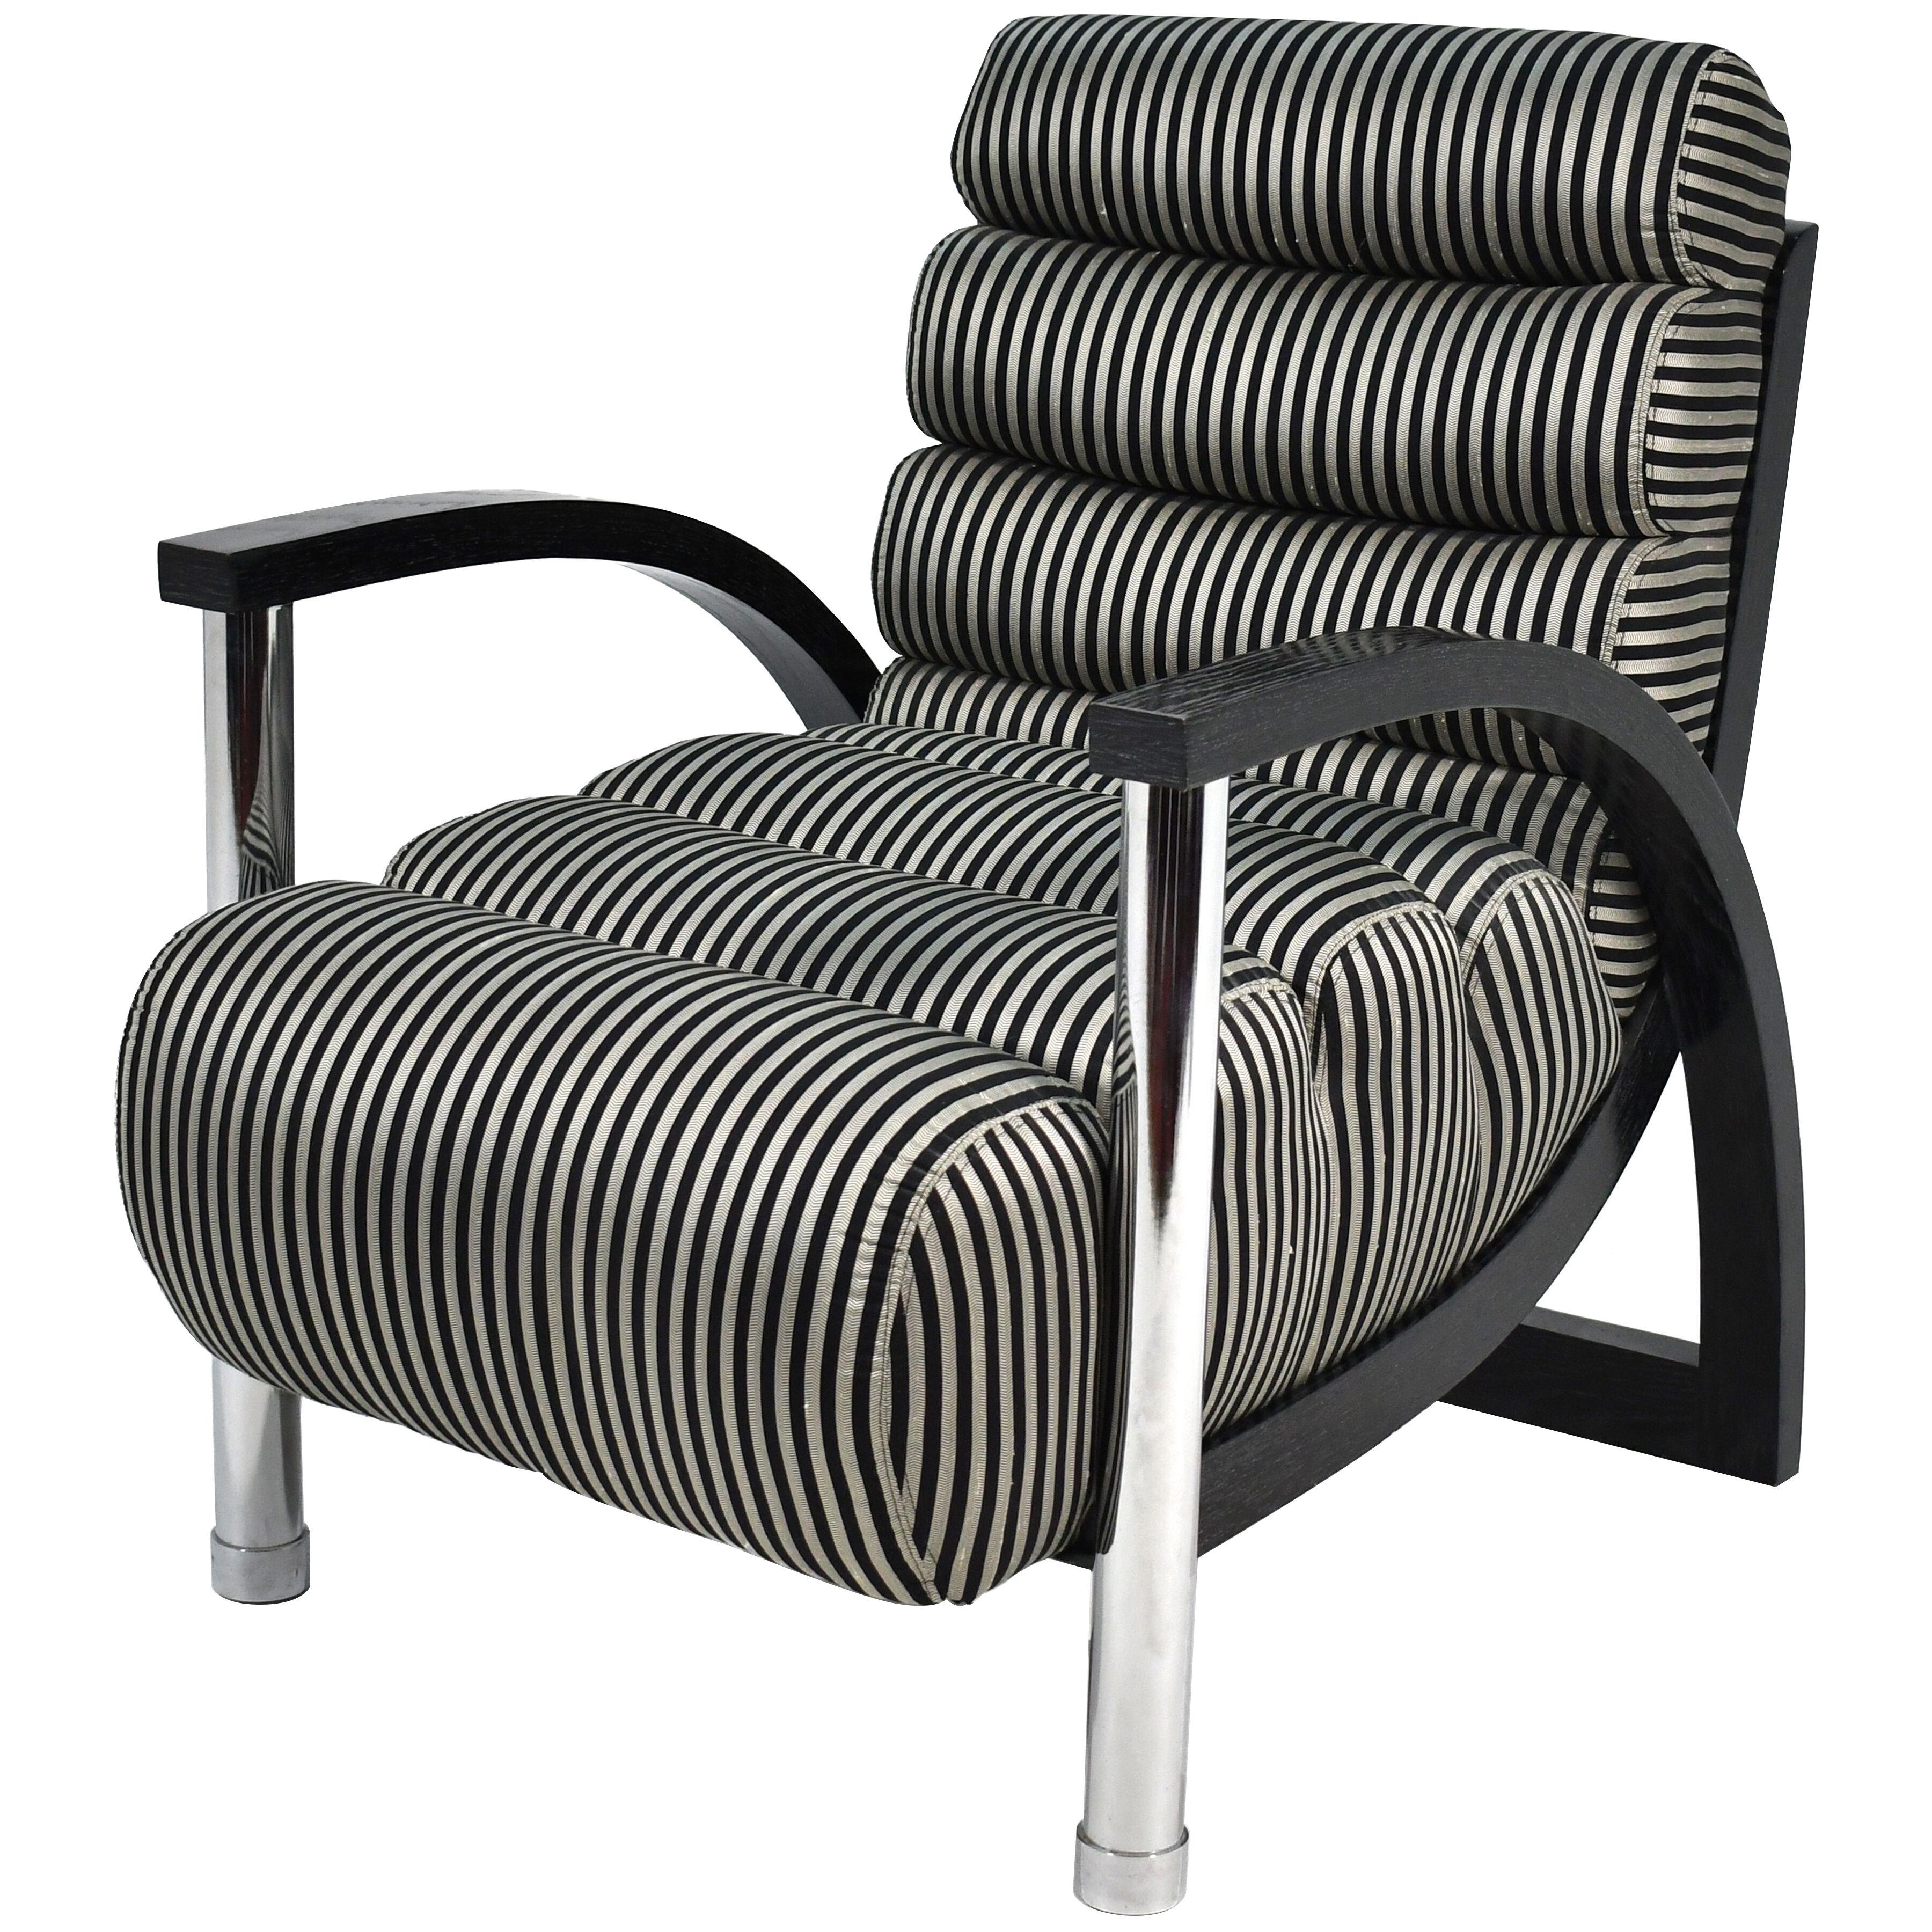 Jay Spectre Eclipse Chair by Century